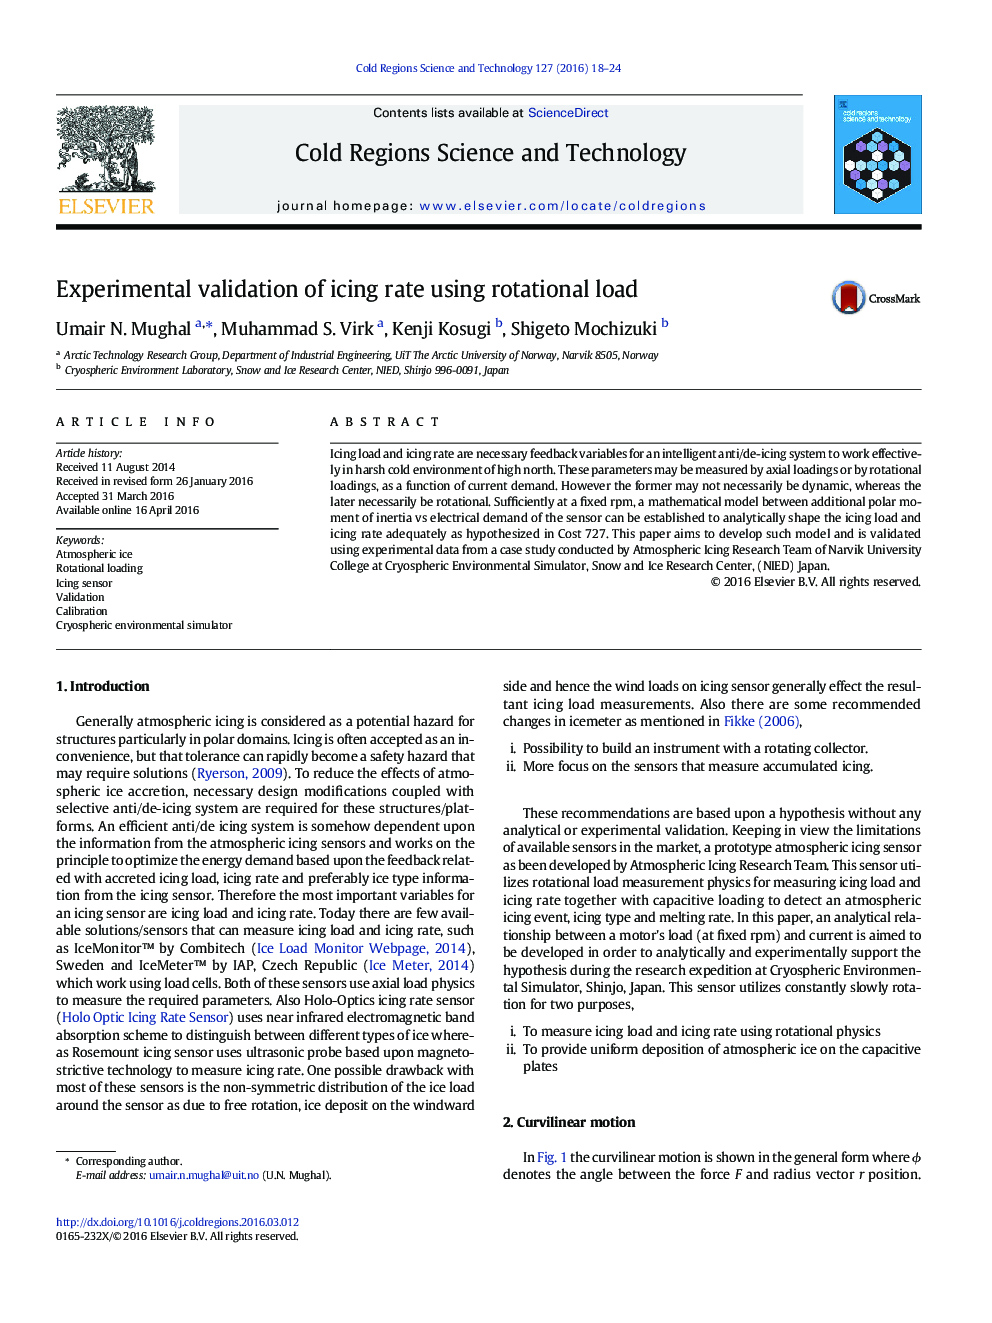 Experimental validation of icing rate using rotational load